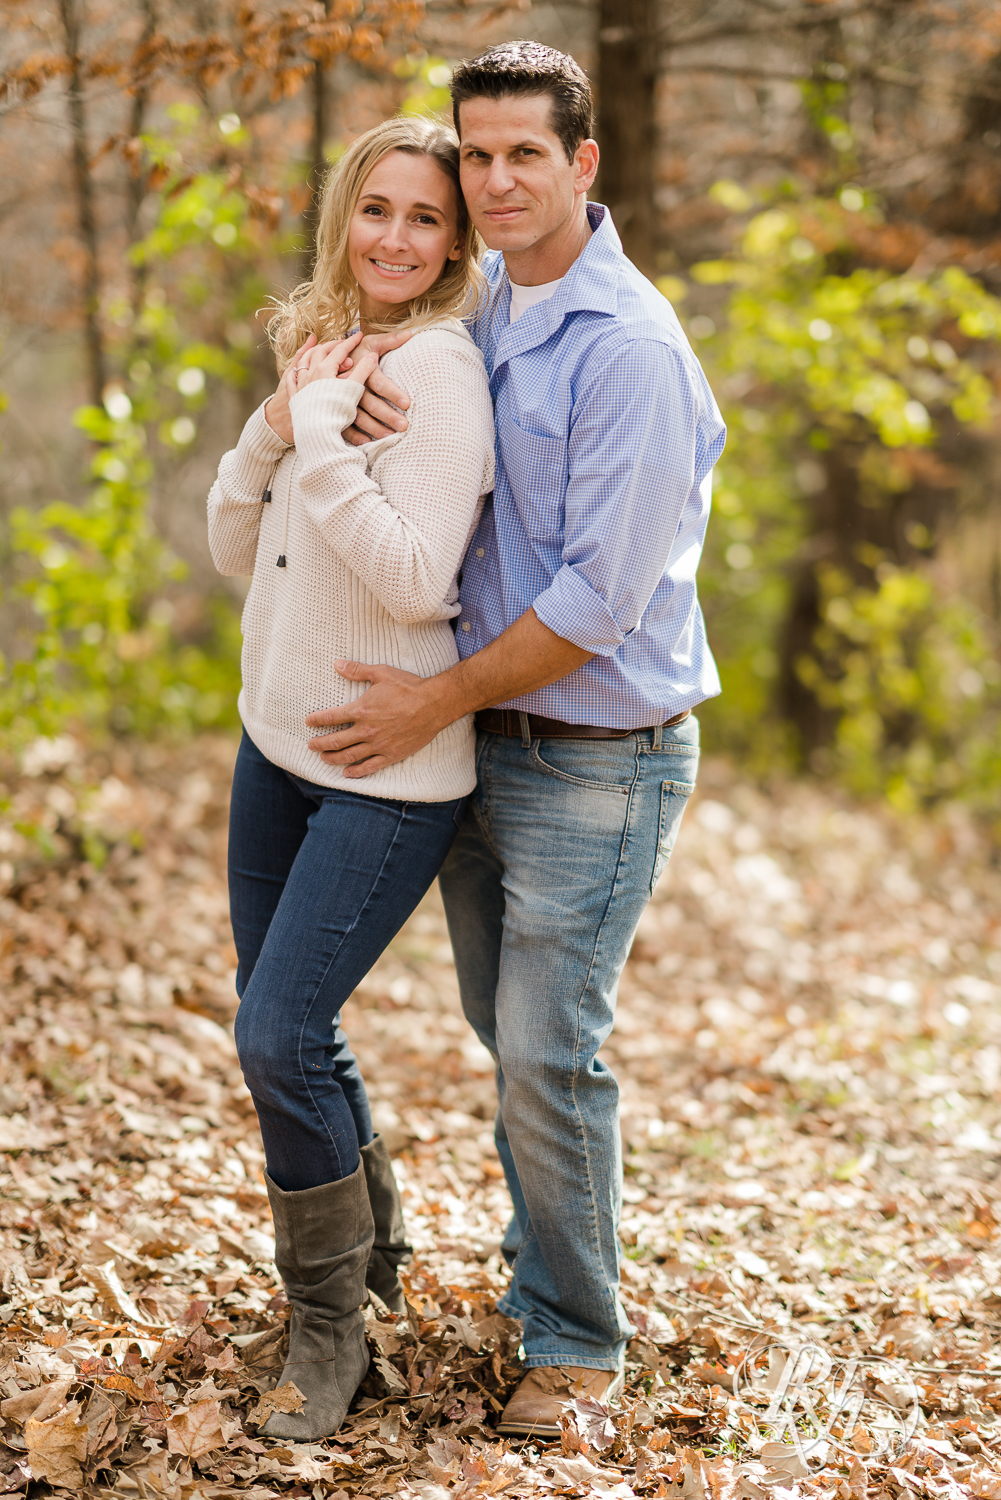 Man and blonde woman smiling in leaves during fall engagement photography session in Chaska, Minnesota.